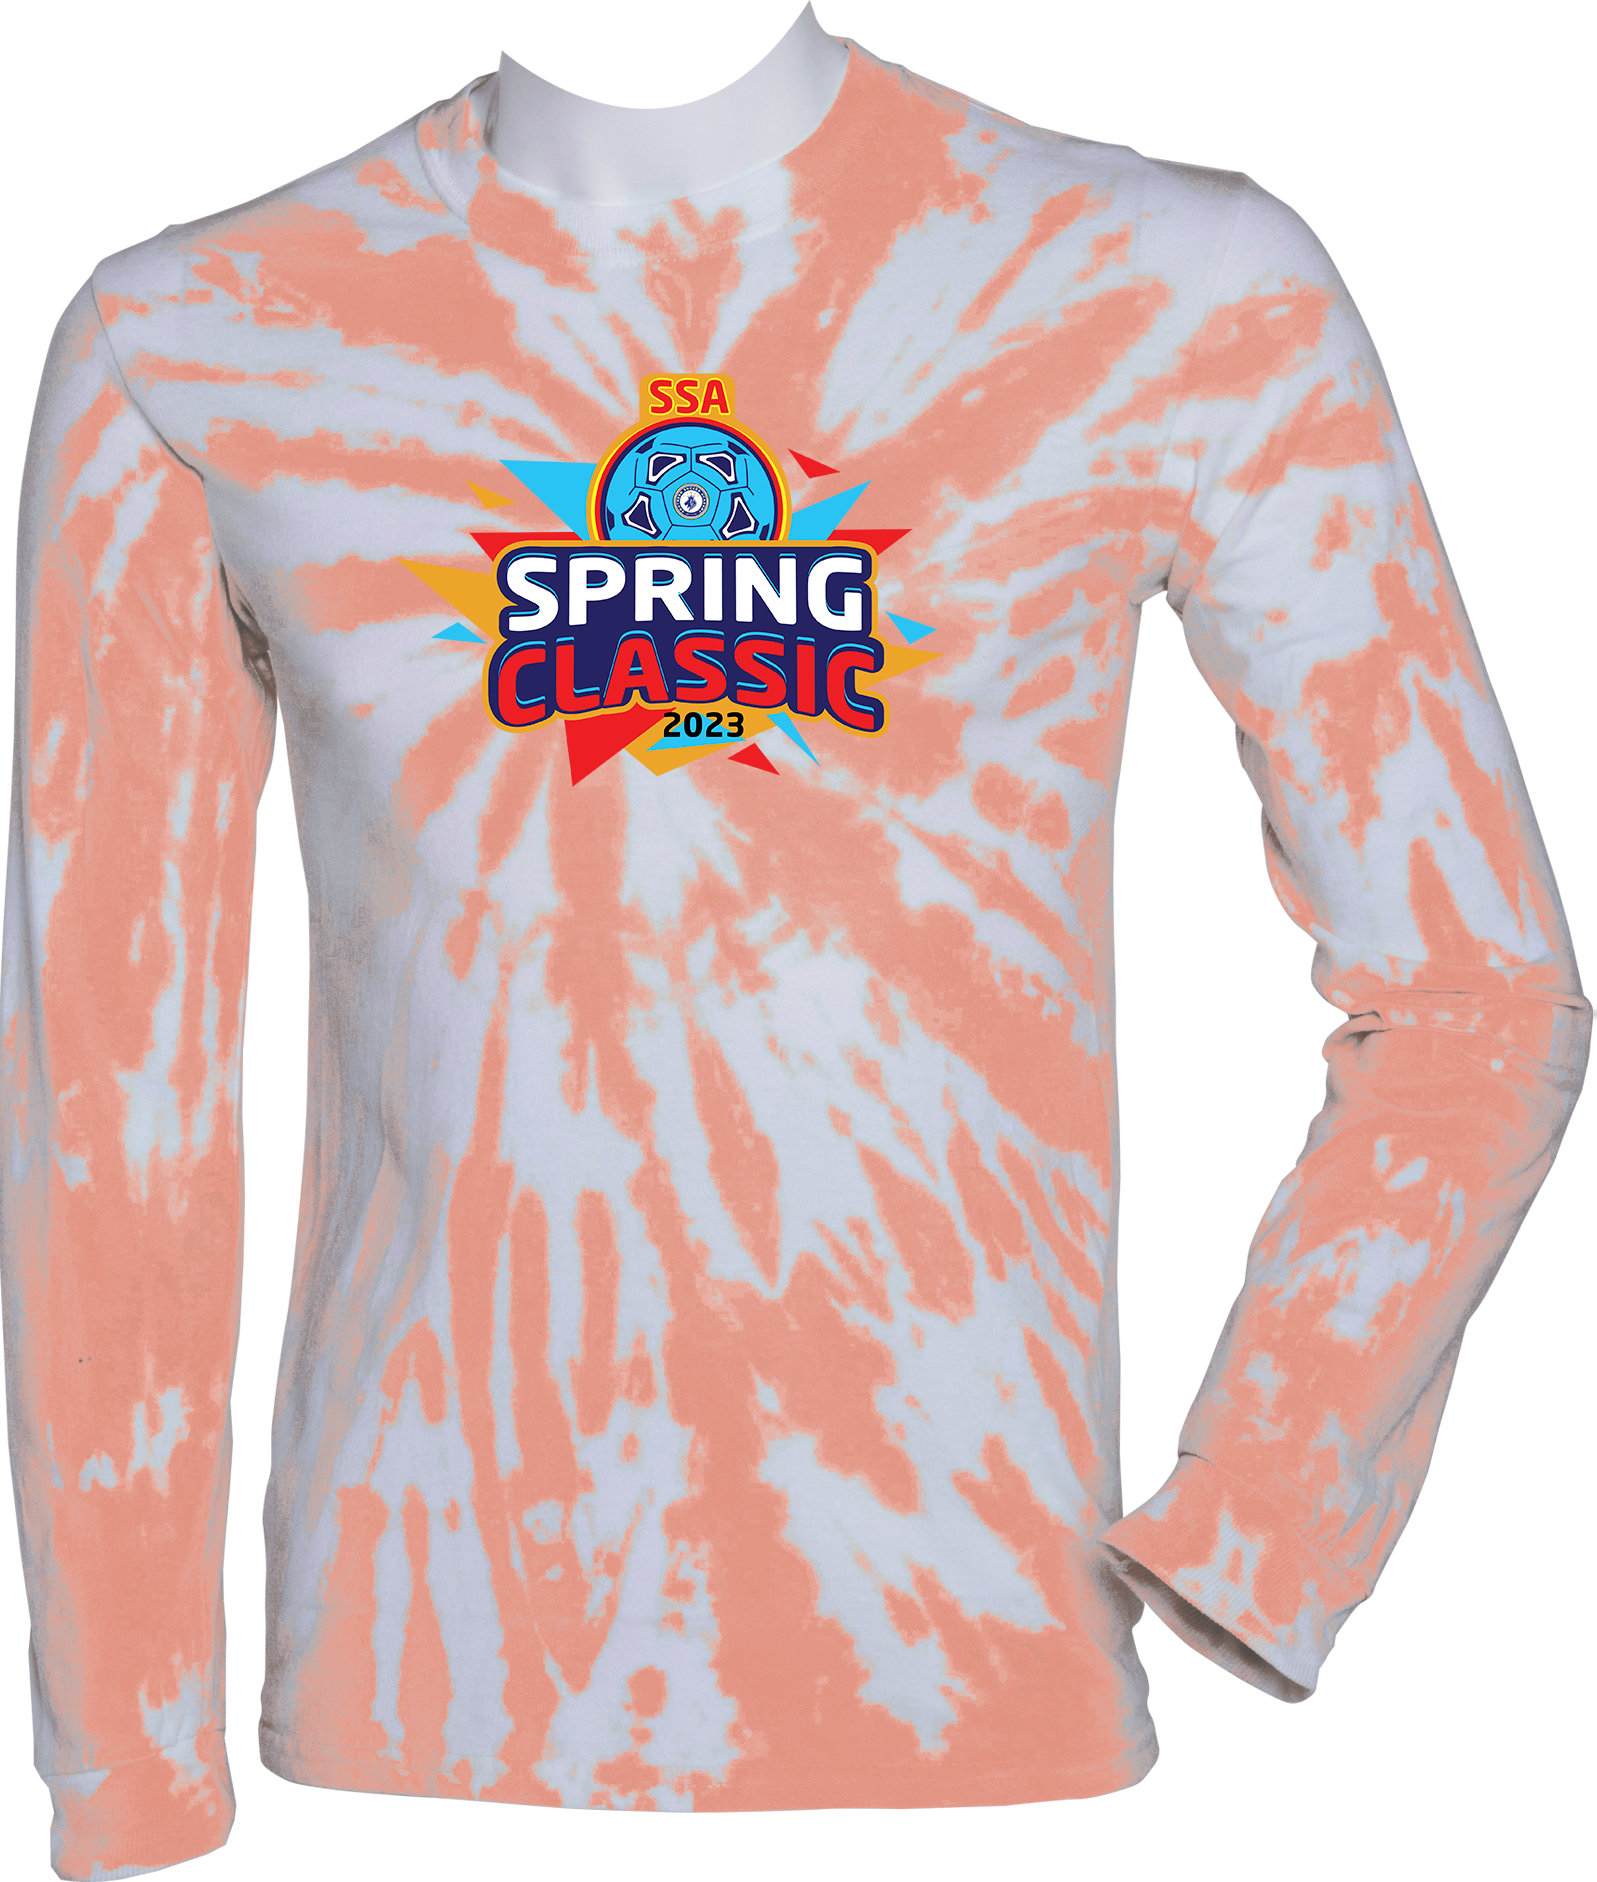 TIE-DYE LONG SLEEVES - 2023 SSA Spring Classic